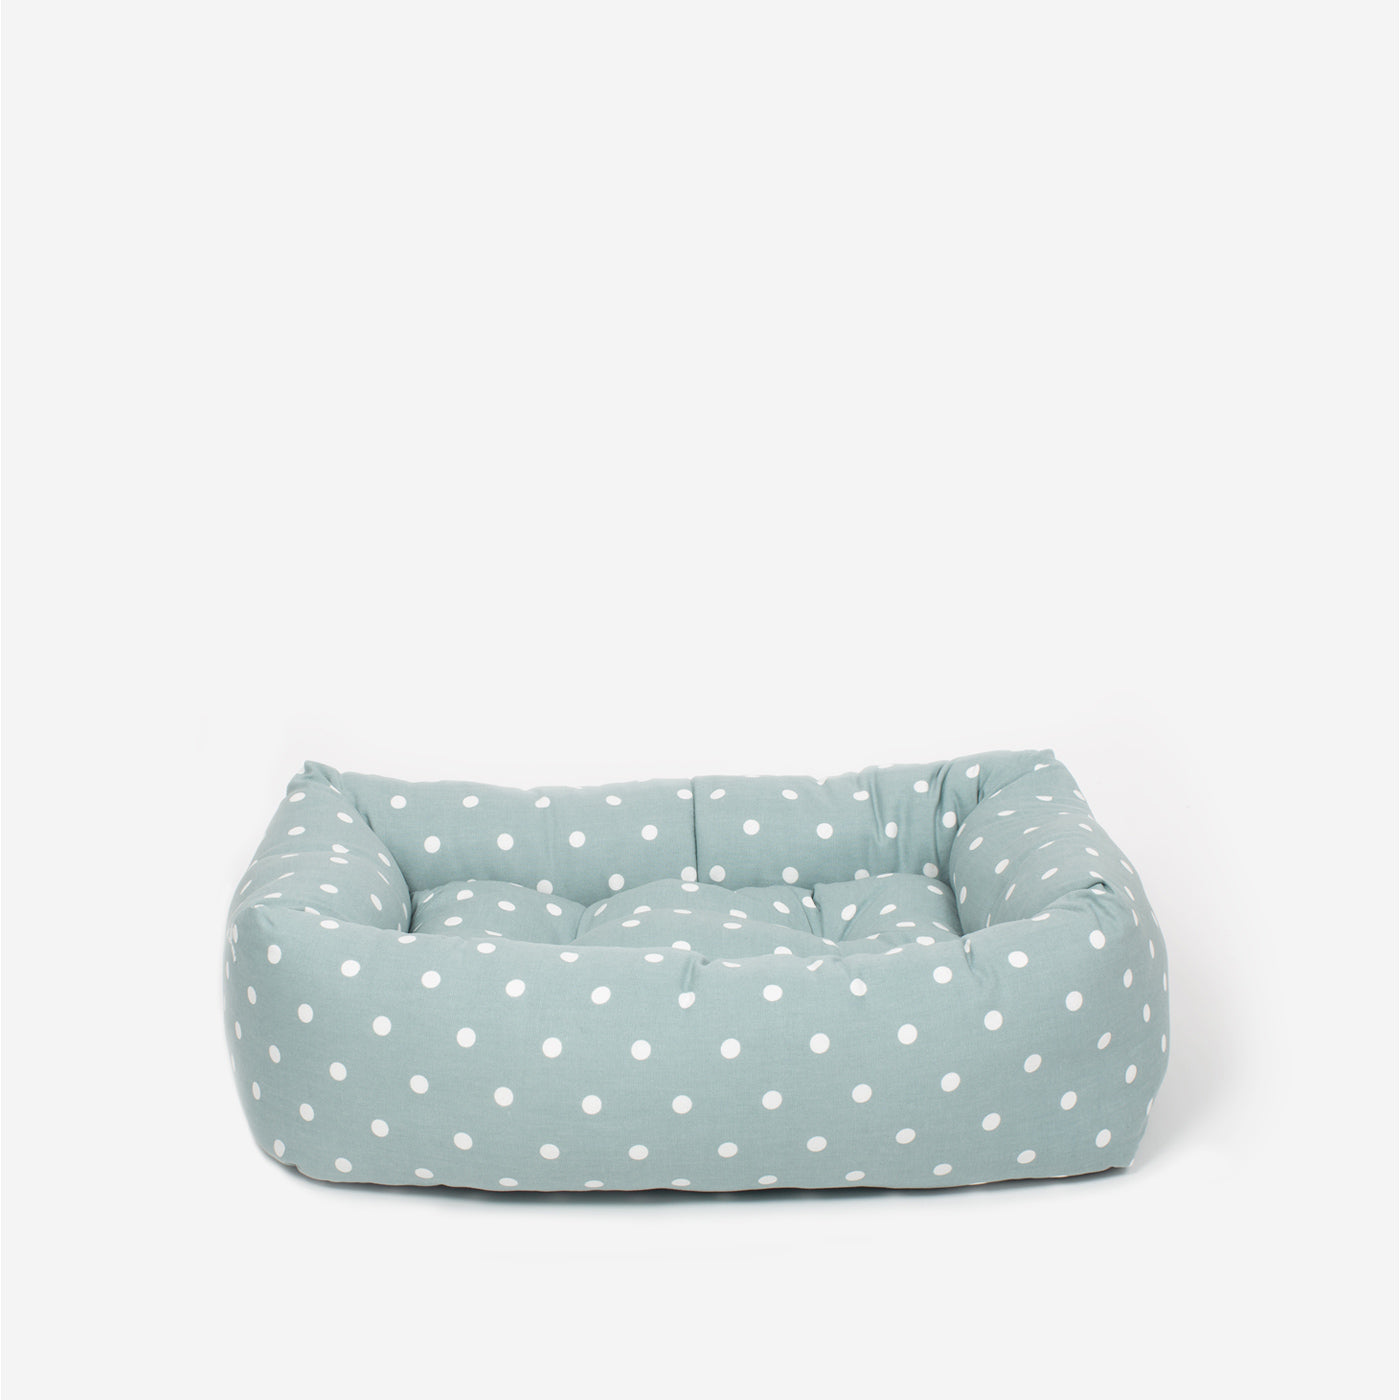 Discover Our Heavy-Duty Dog Crate With Duck Egg Spot Cosy & Calming Puppy Crate Bed Set! The Perfect Crate Bed For Pet Burrow. Available To Personalise Here at Lords & Labradors 